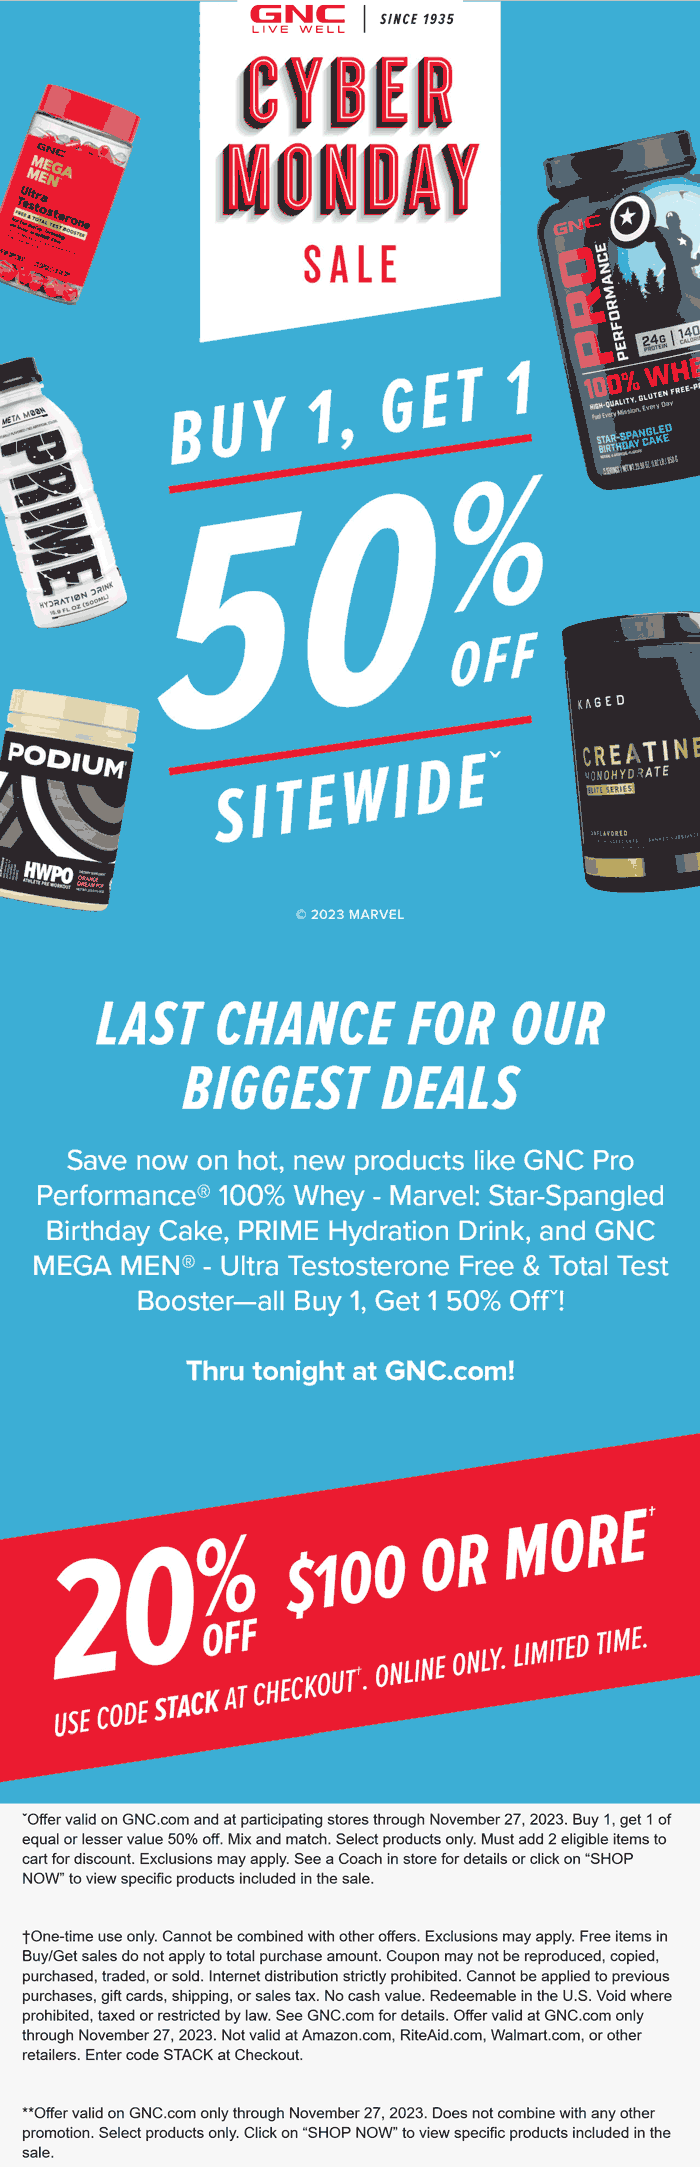 Second item 50% off + $20 off $100 today at GNC via promo code STACK #gnc